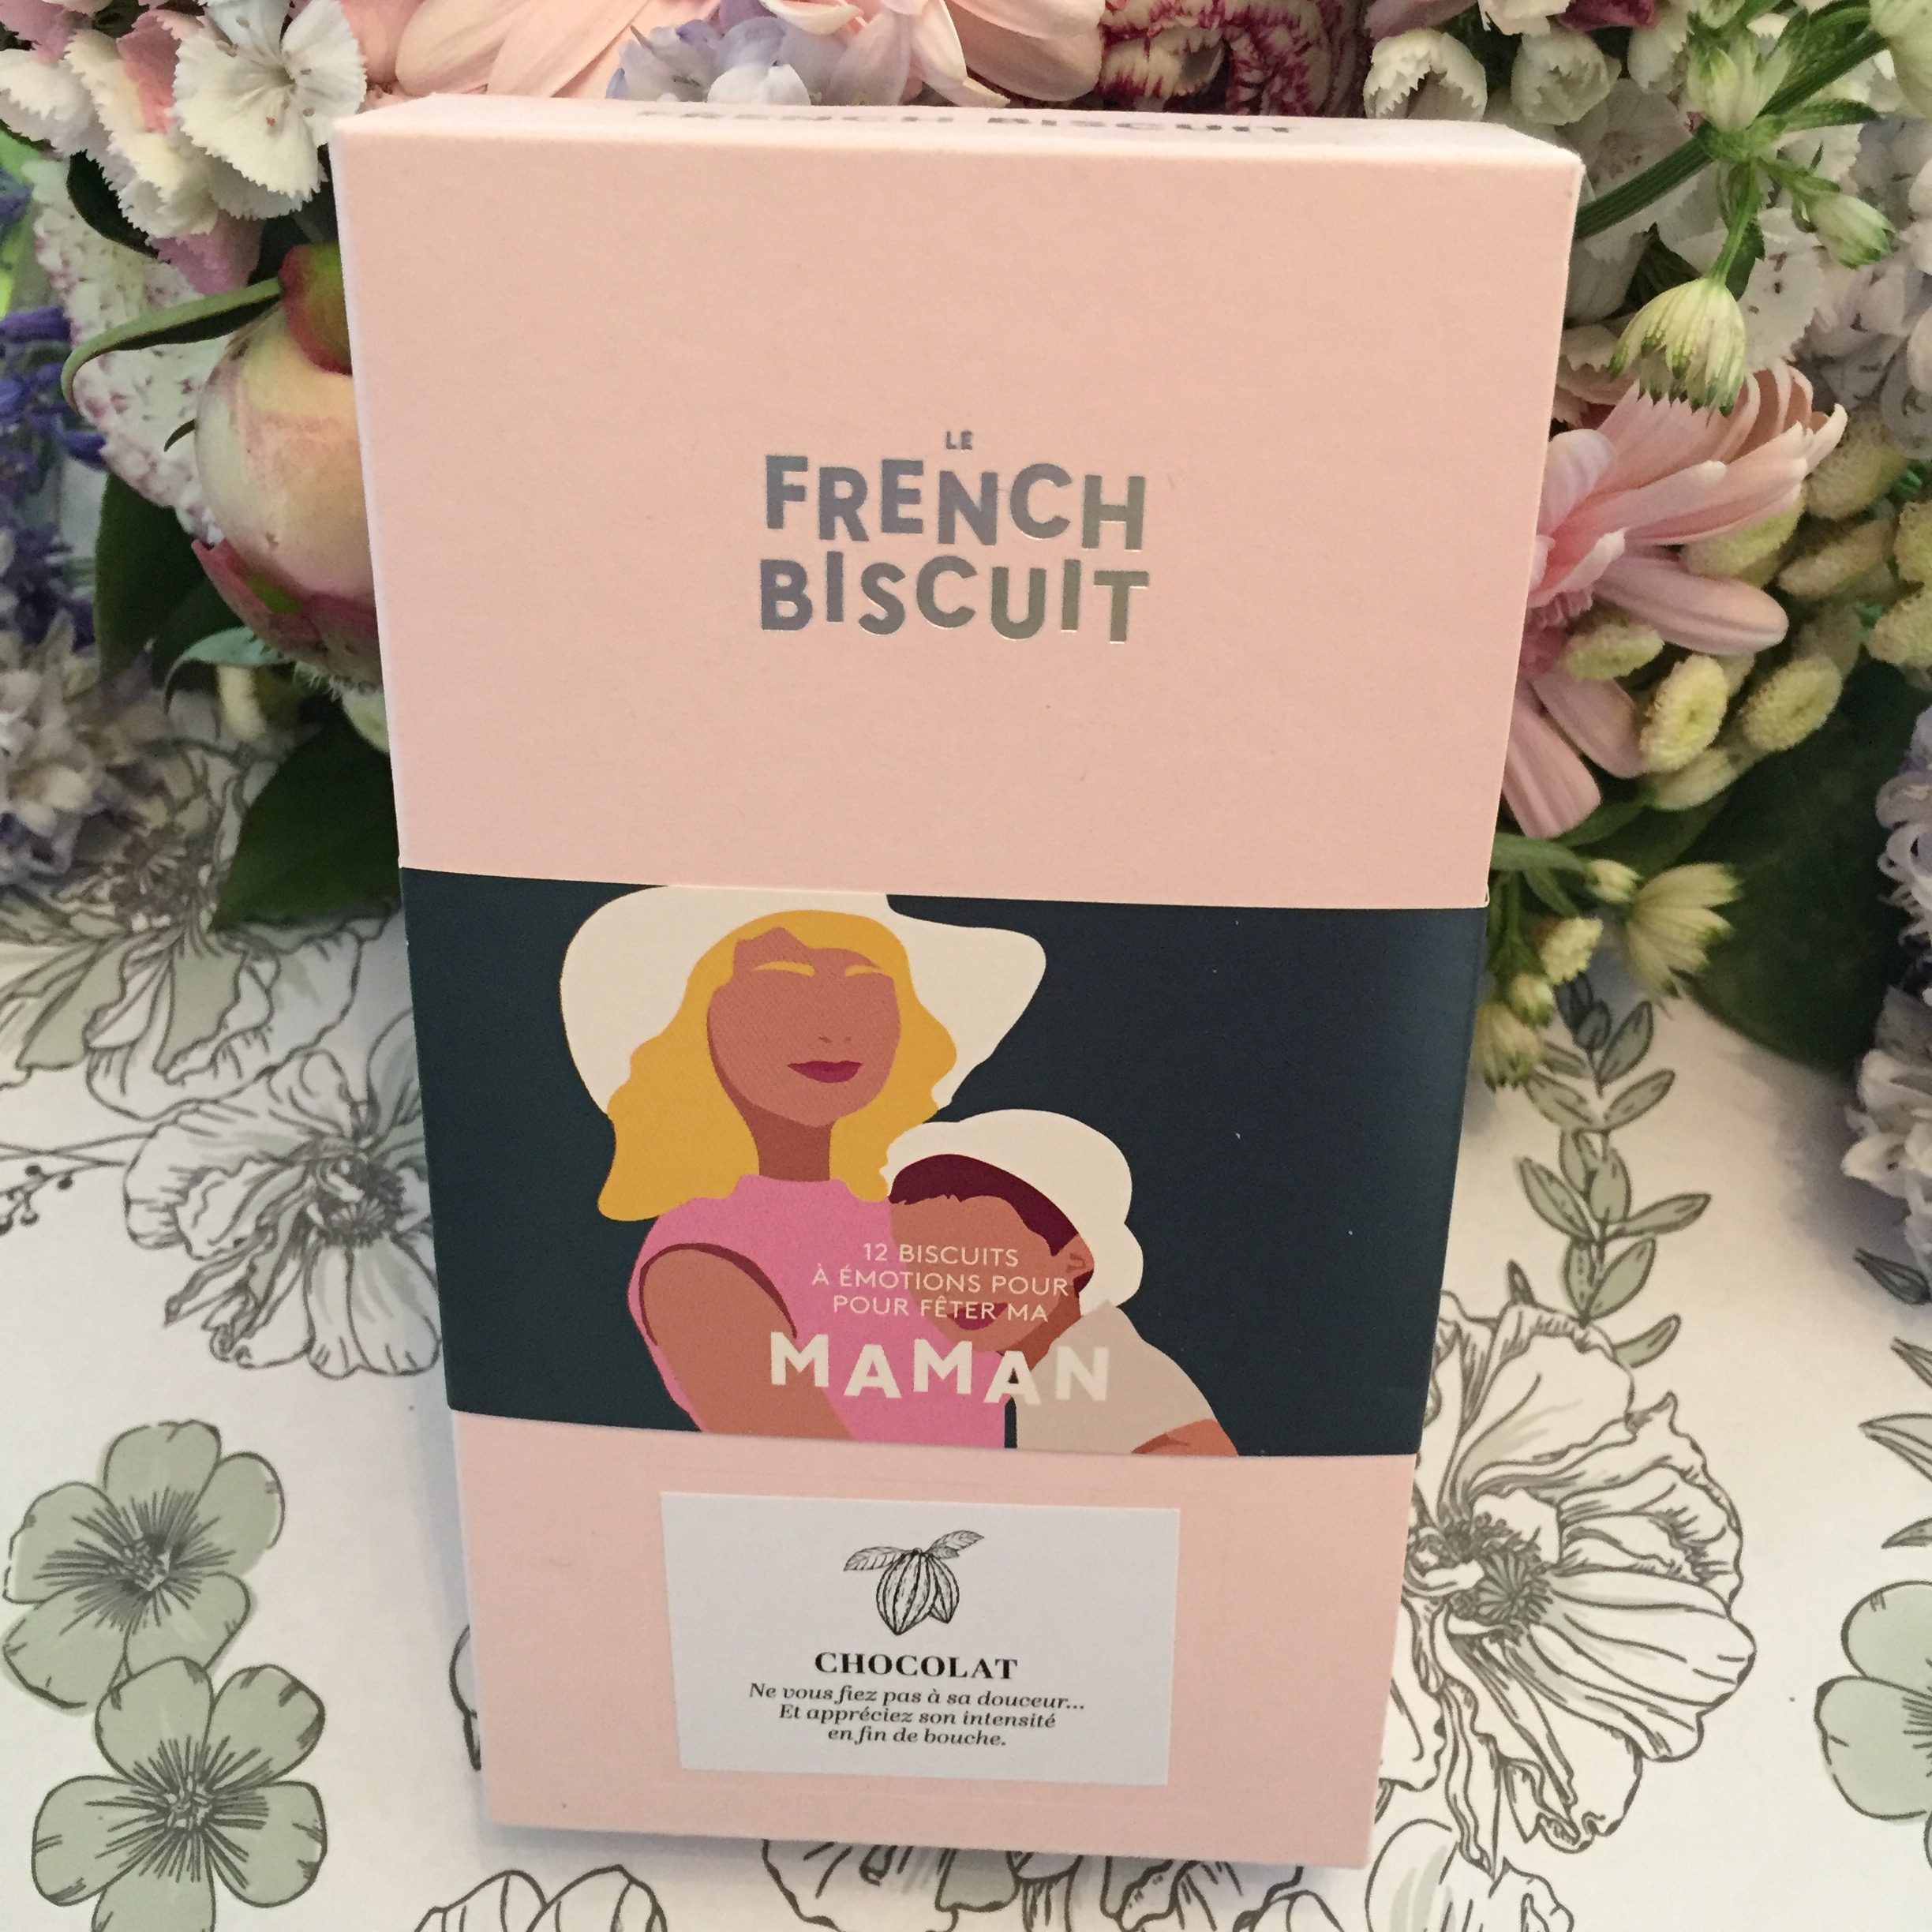 Le French Biscuit MAMAN